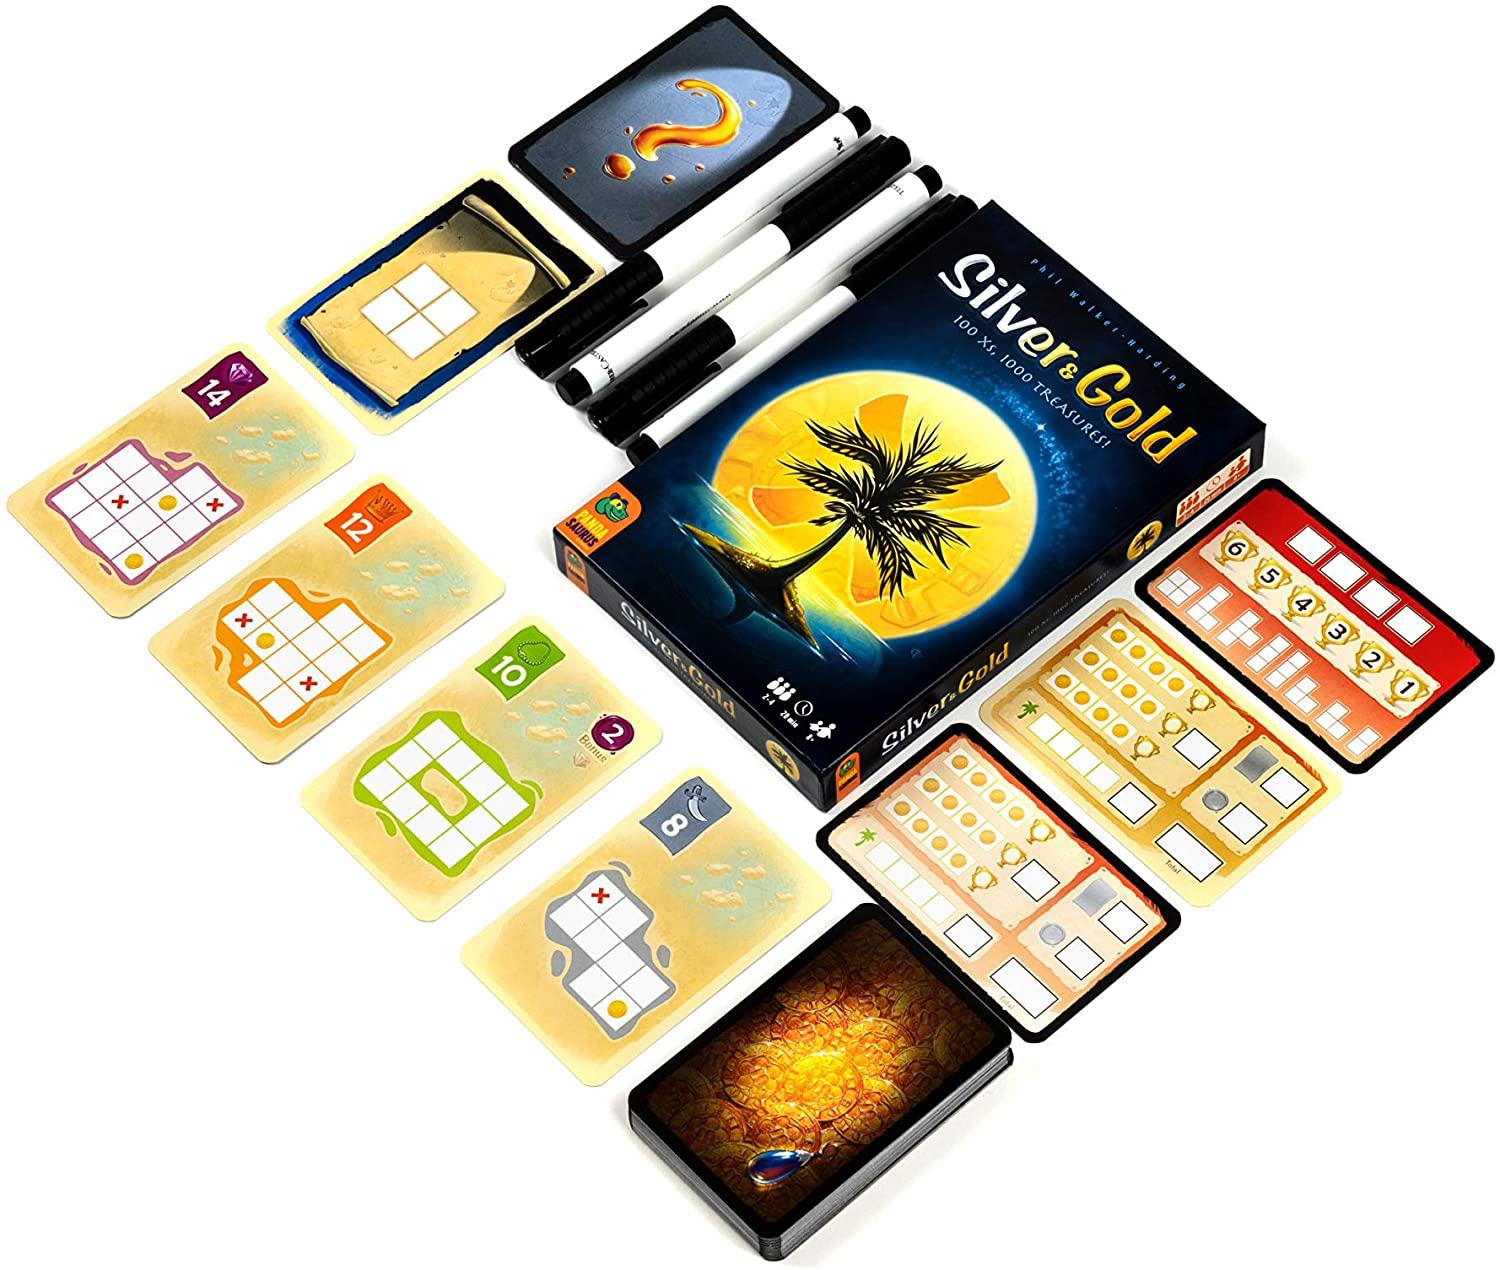 Pandasaurus Games Silver and Gold Card Game for $6.89